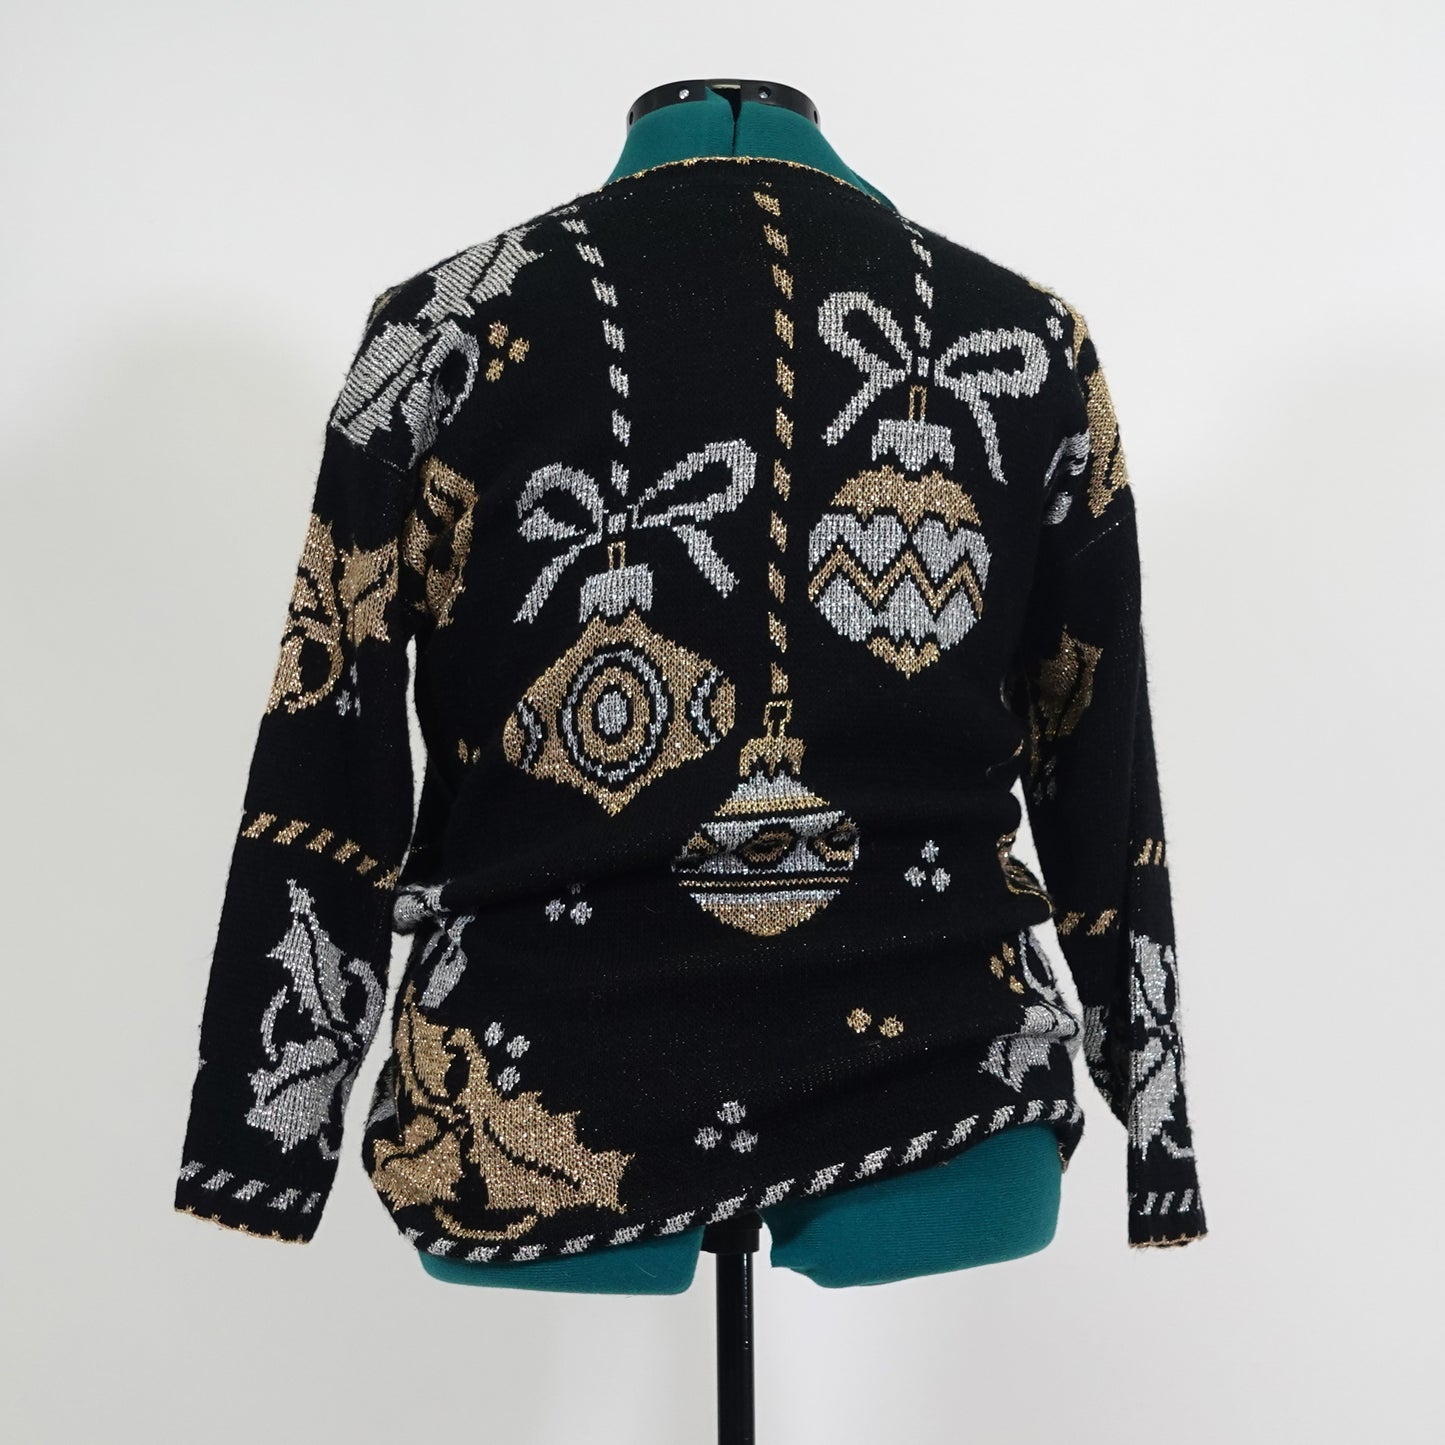 Vintage Black Sweater with Gold Ornaments